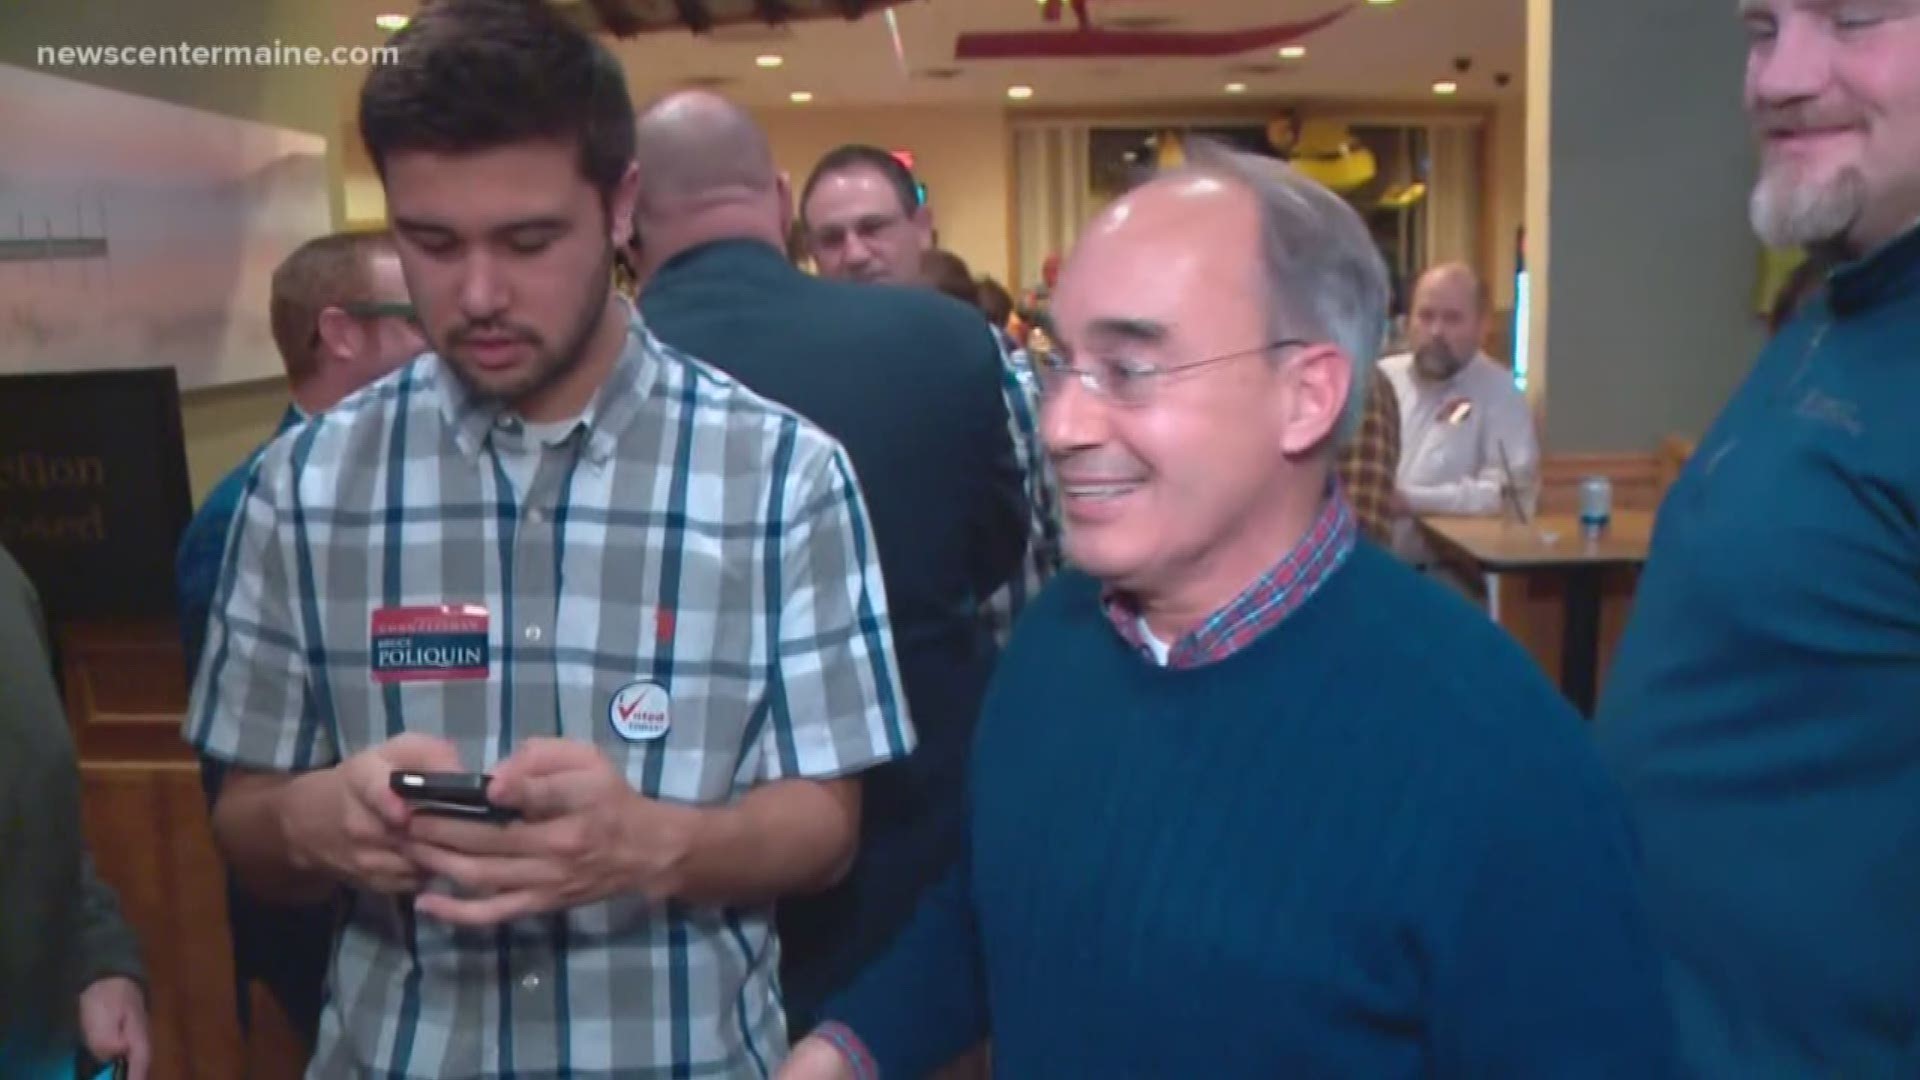 Court rejects Poliquin's request to stop election certification